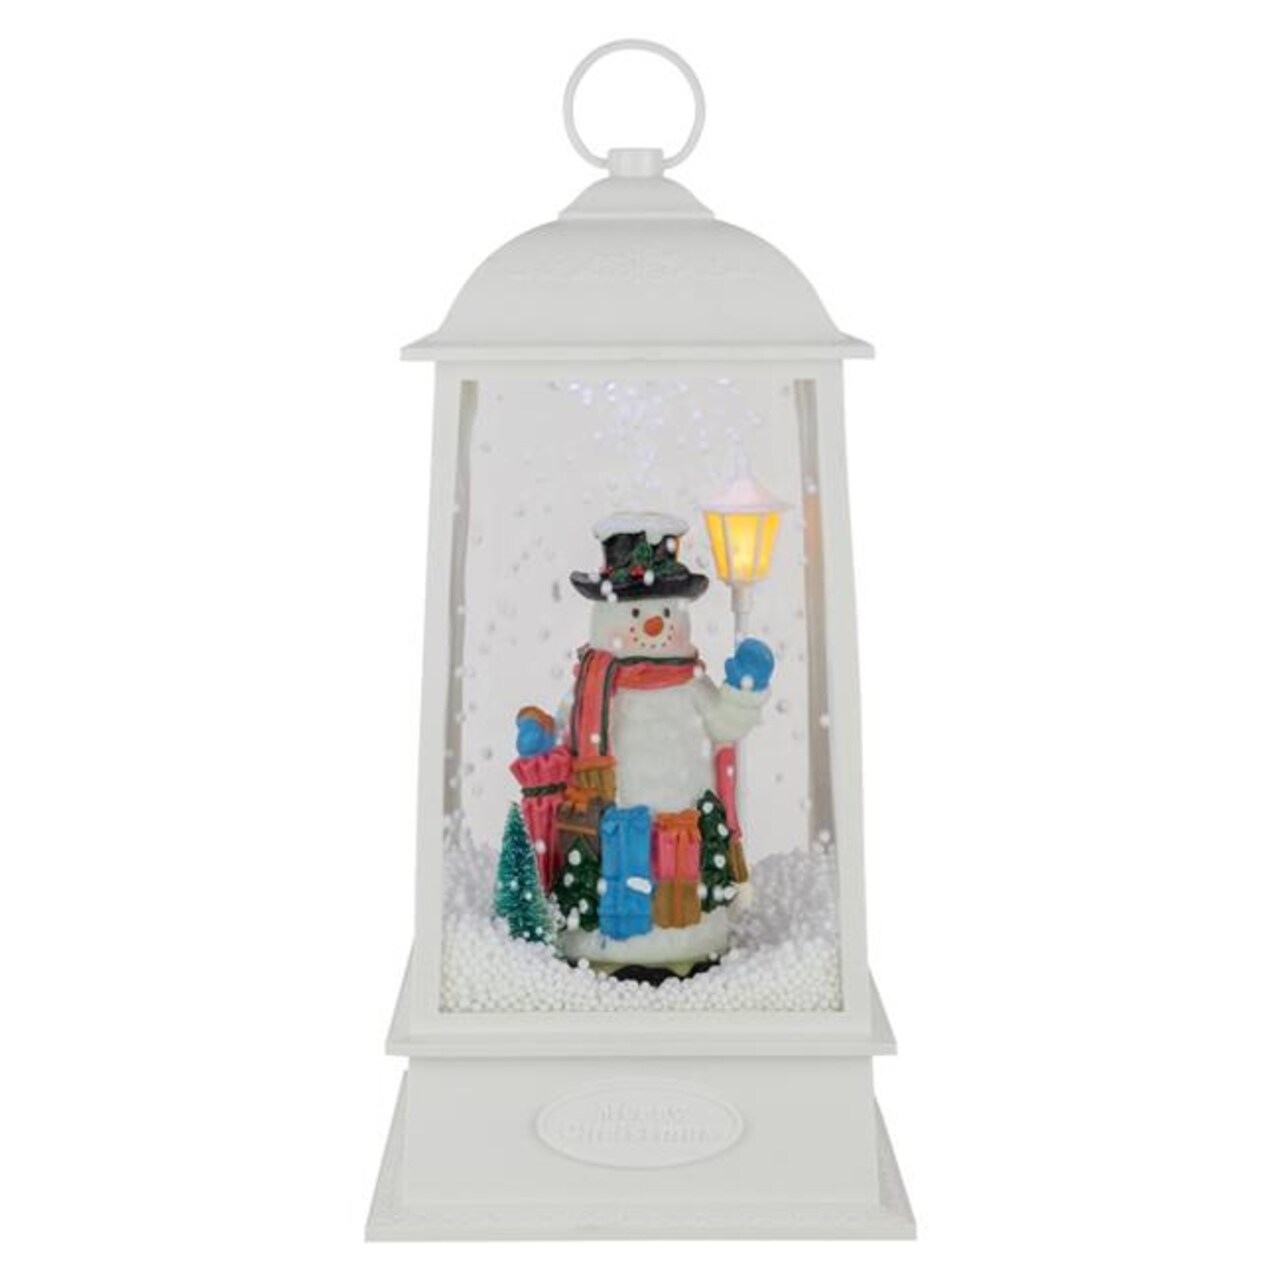 Northlight 34864990 13.5 in. LED Lighted Musical Snowing Snowman Christmas Lantern